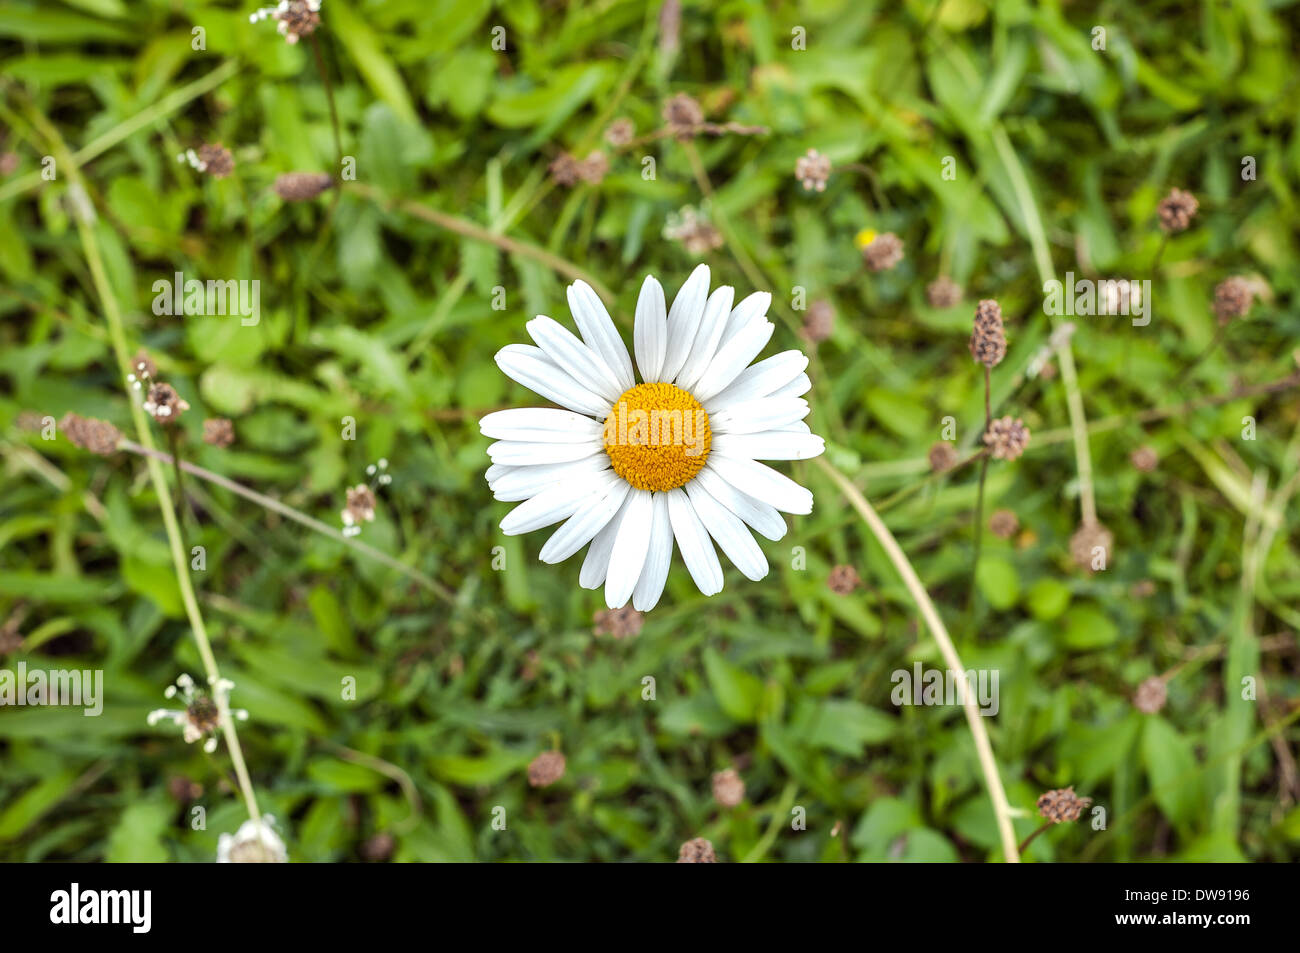 Single white daisy seen from above against a green grass background Stock Photo